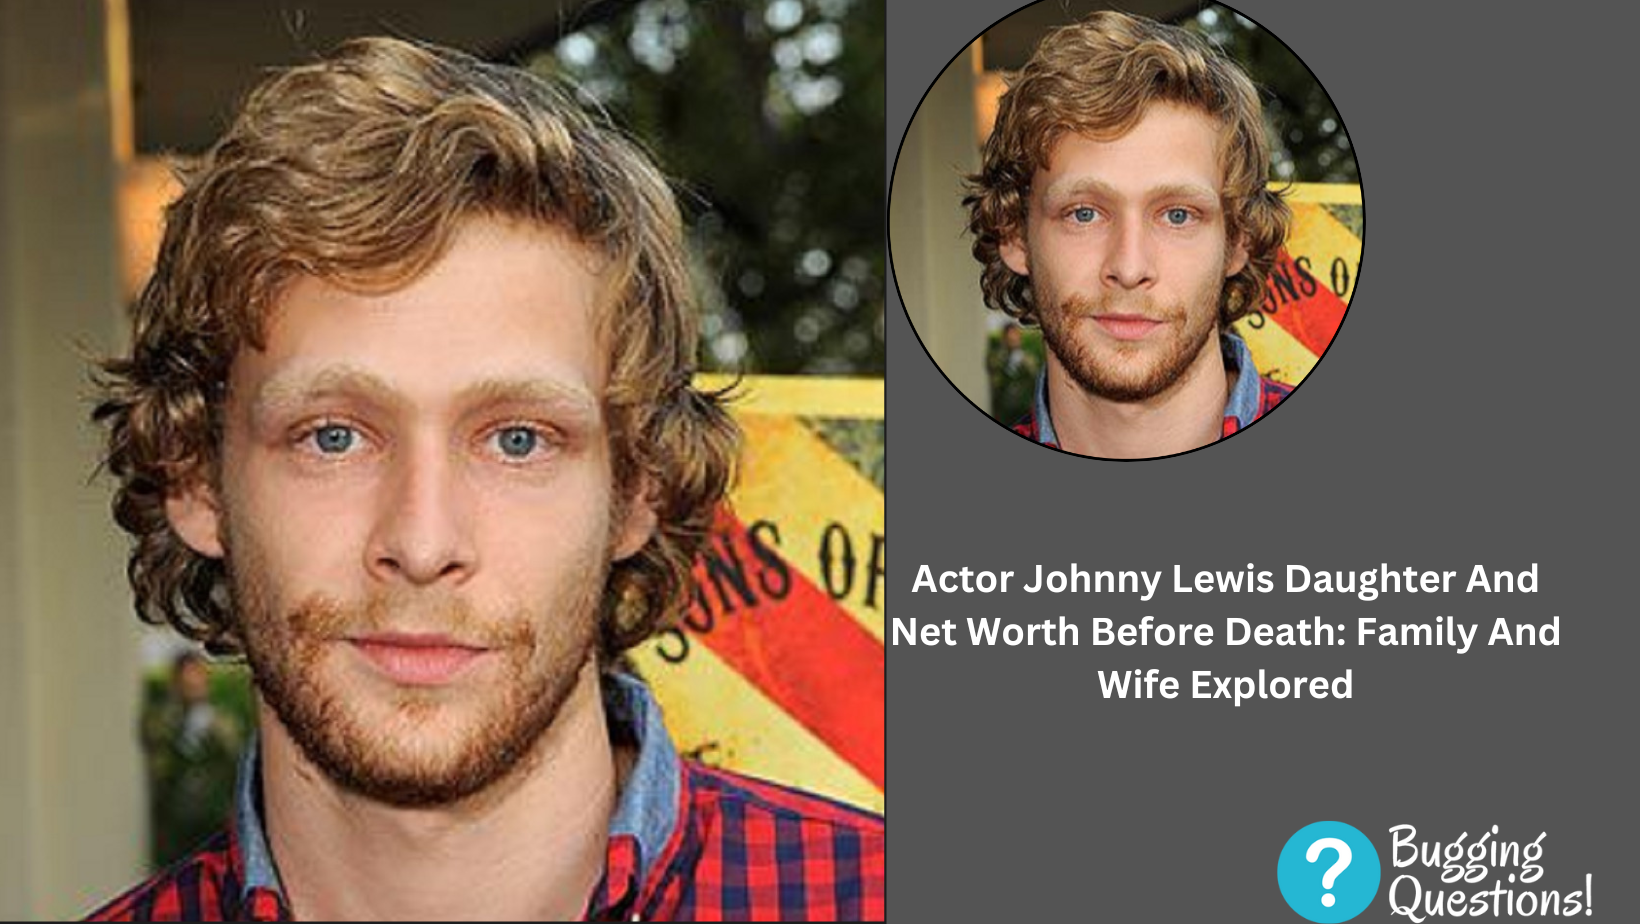 Actor Johnny Lewis Daughter And Net Worth Before Death